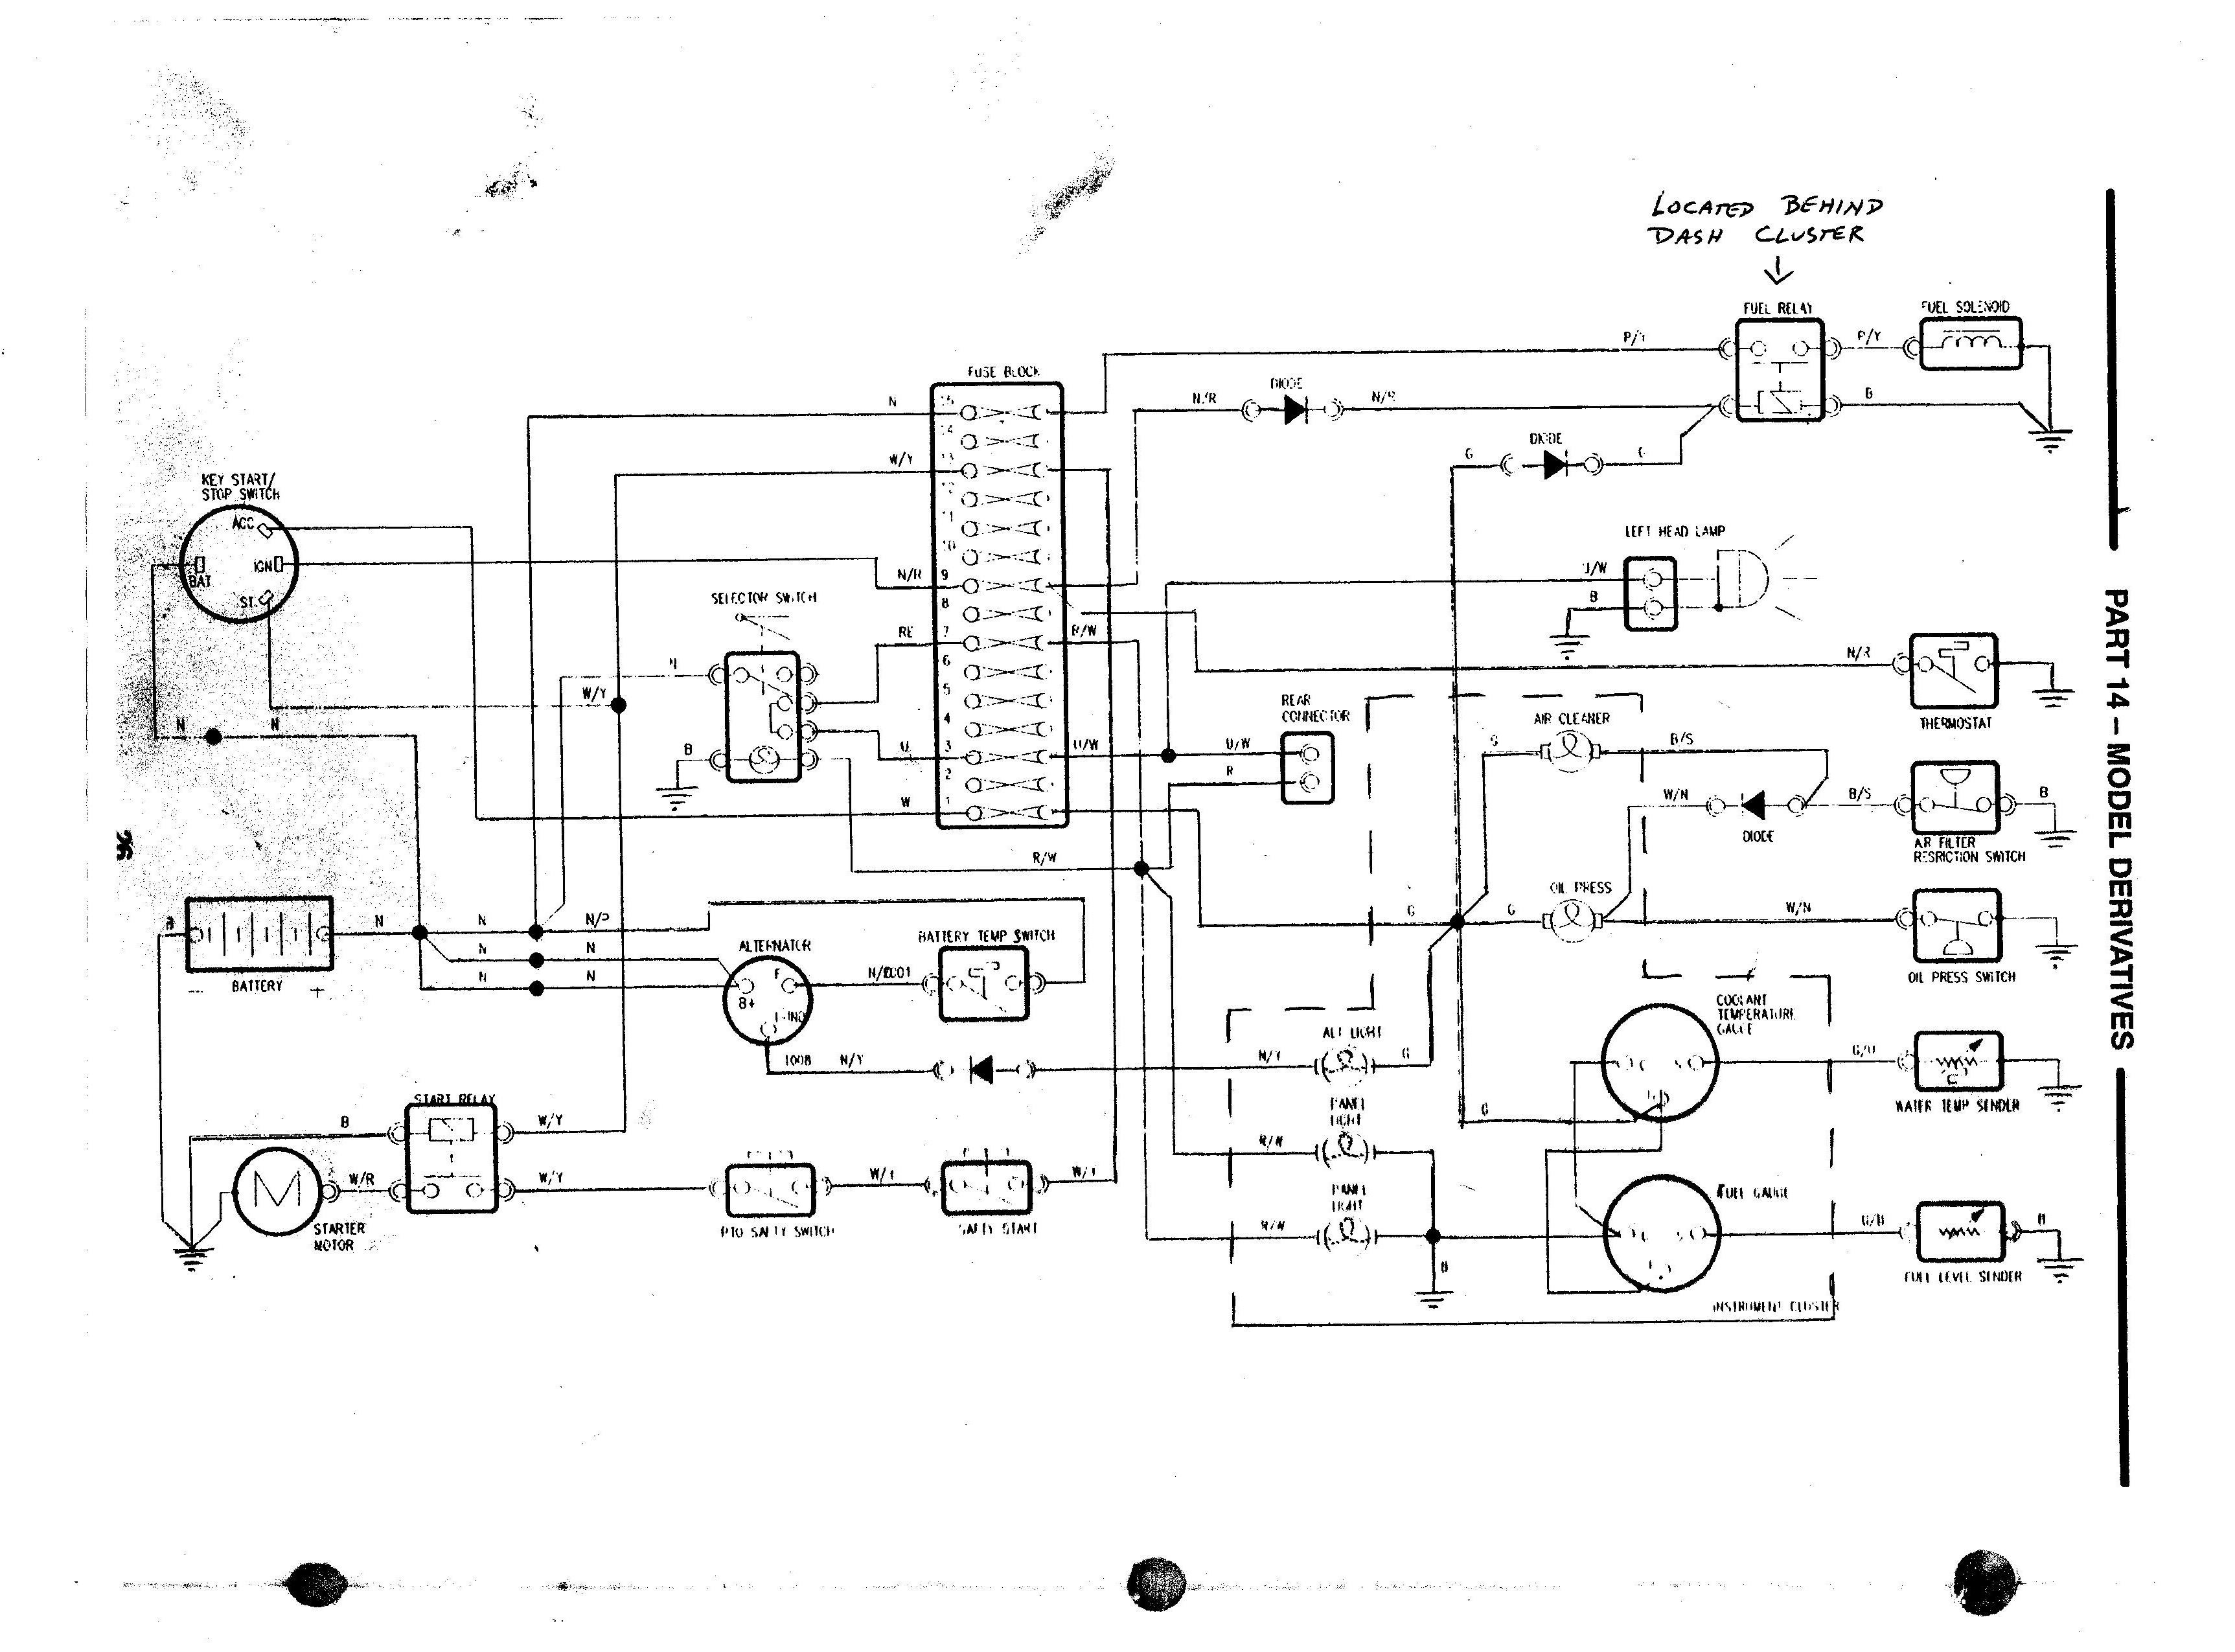 Chevy S10 Parts Diagram ford 3230 Wiring Diagram Wiring Diagram Of Chevy S10 Parts Diagram